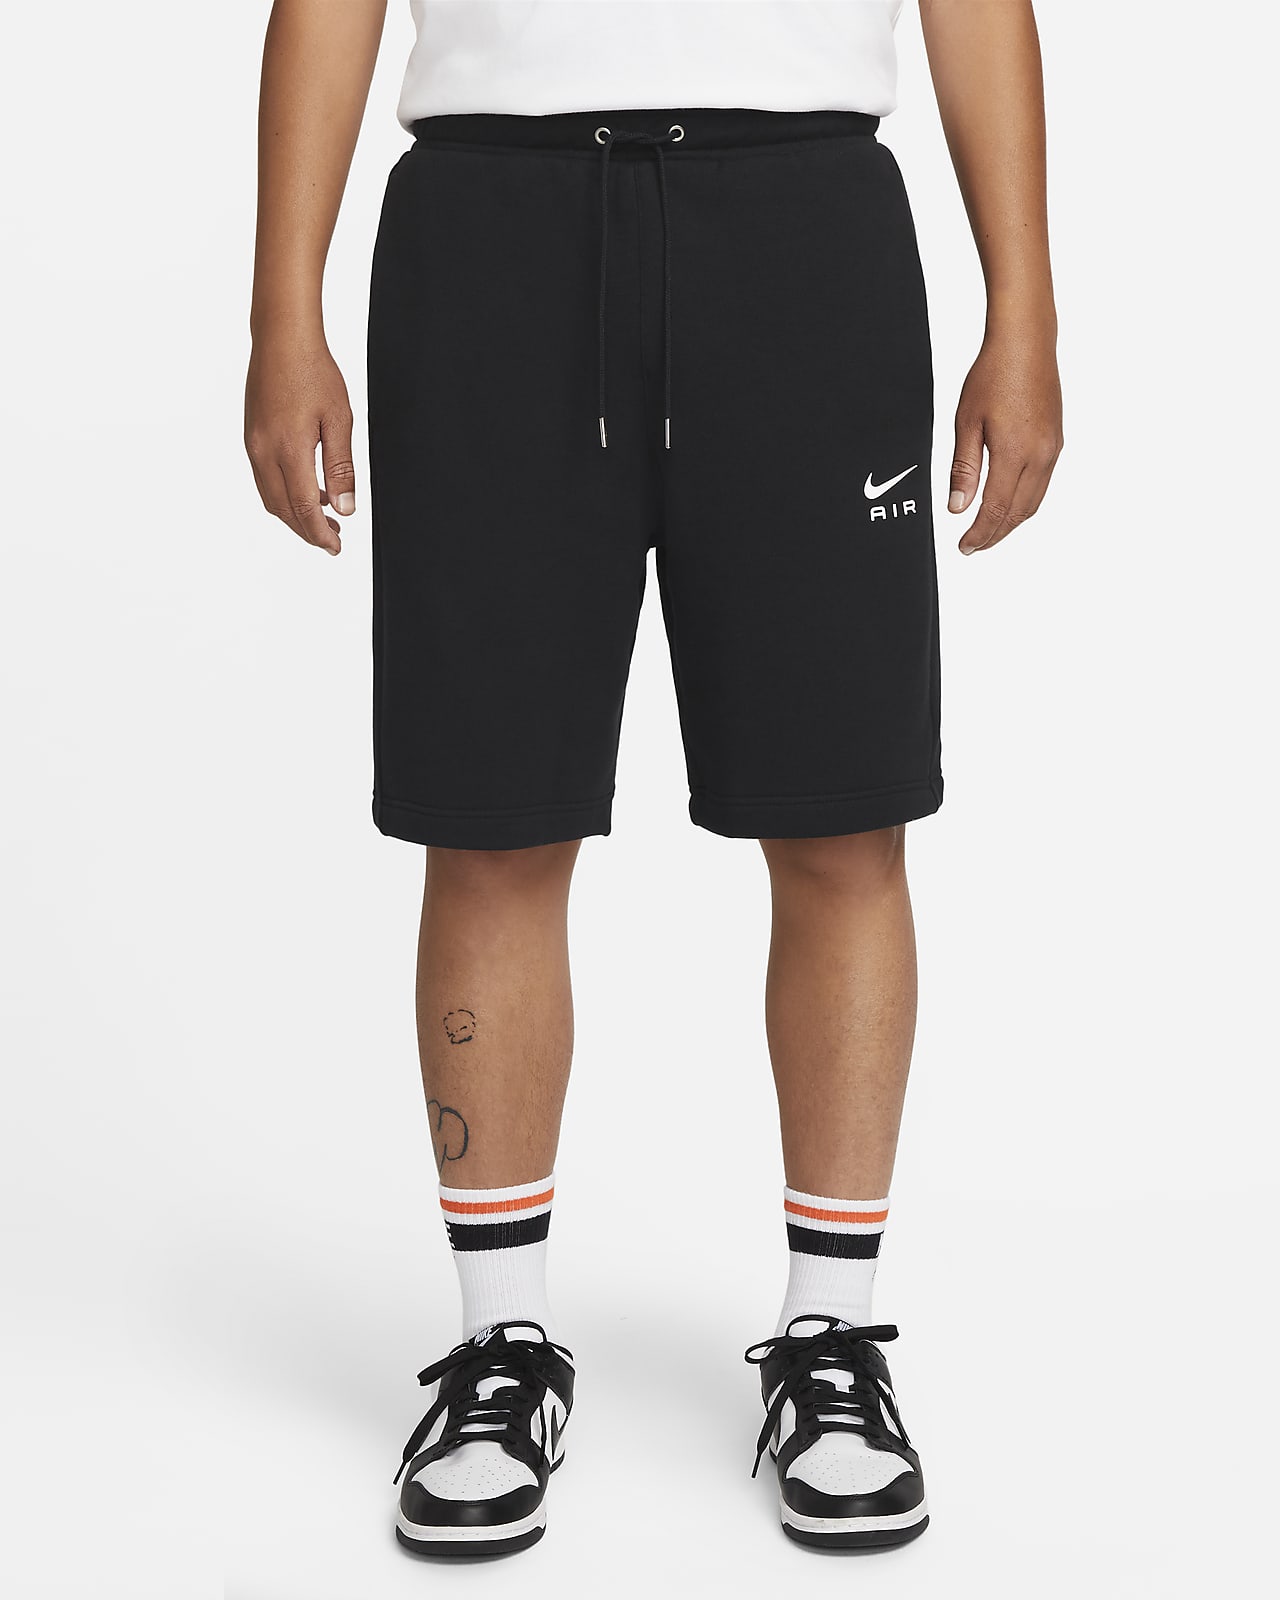 https://static.nike.com/a/images/t_PDP_1280_v1/f_auto,q_auto:eco/b7a292e8-5d80-4621-9ff3-a983860eeea7/sportswear-air-mens-french-terry-shorts-9QKbvm.png